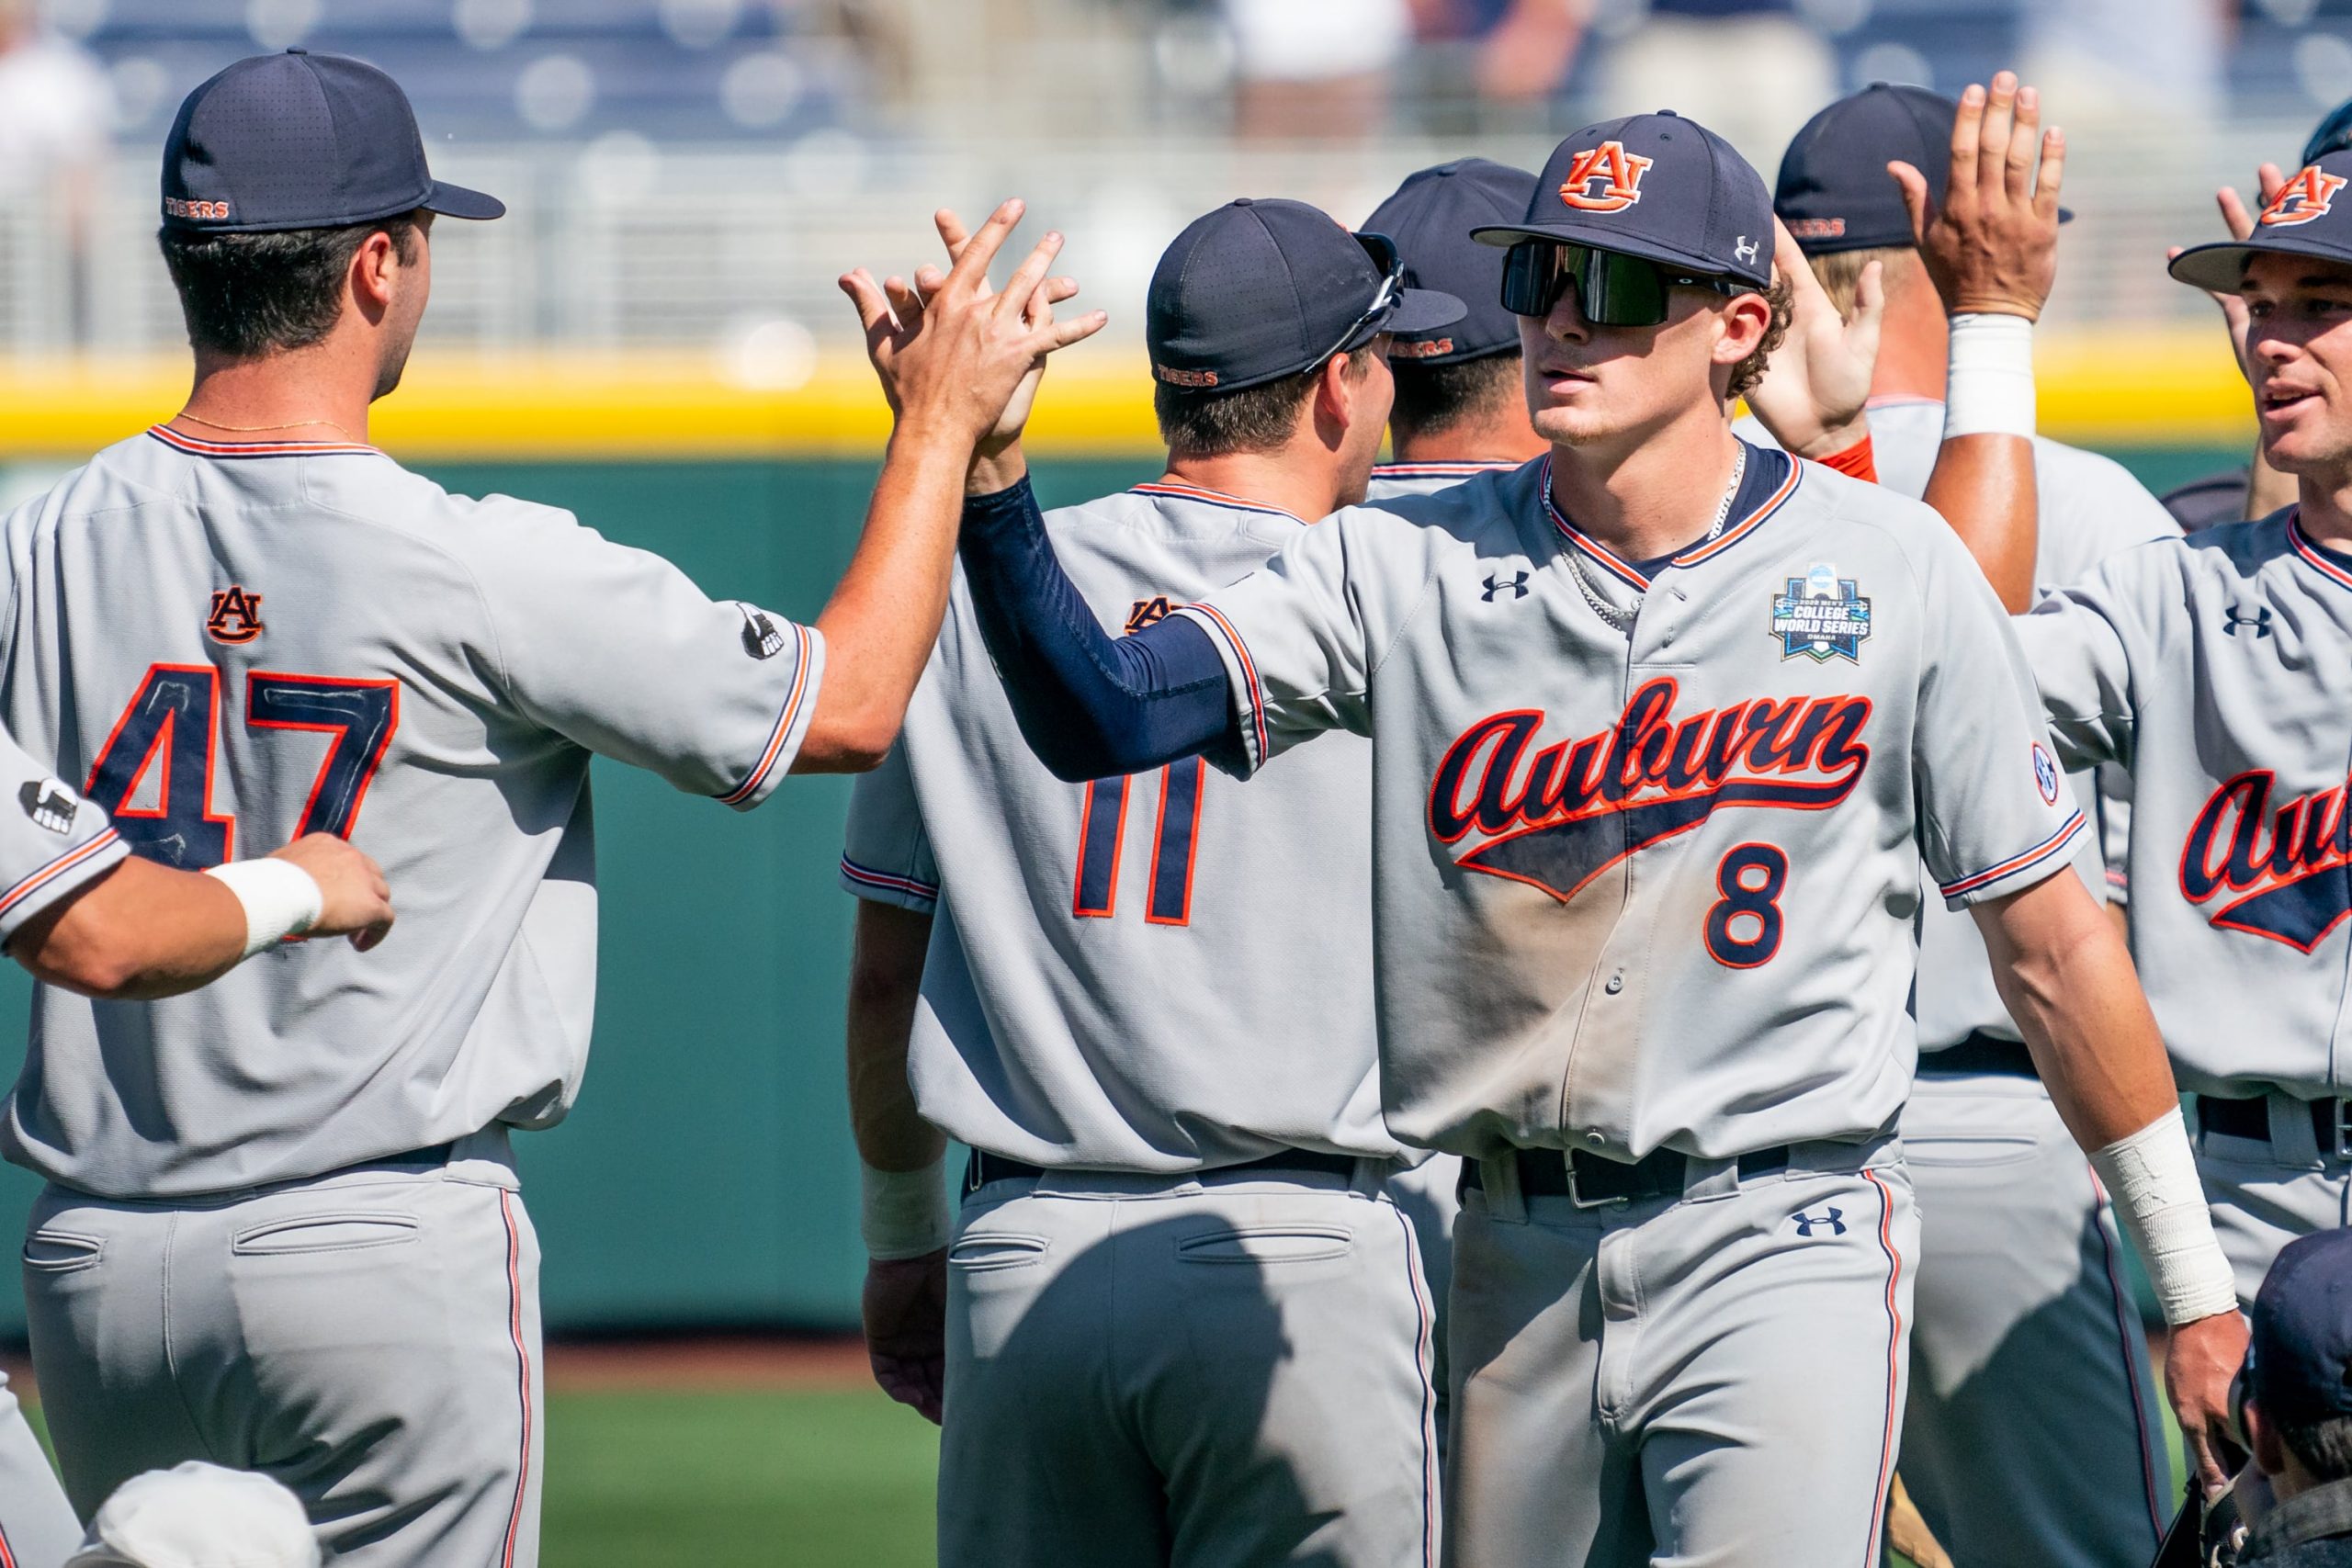 Auburn Tigers infielder Bryson Ware (8) high fives infielder Tommy Sheehan (47) after defeating the Stanford Cardinal at Charles Schwab Field.